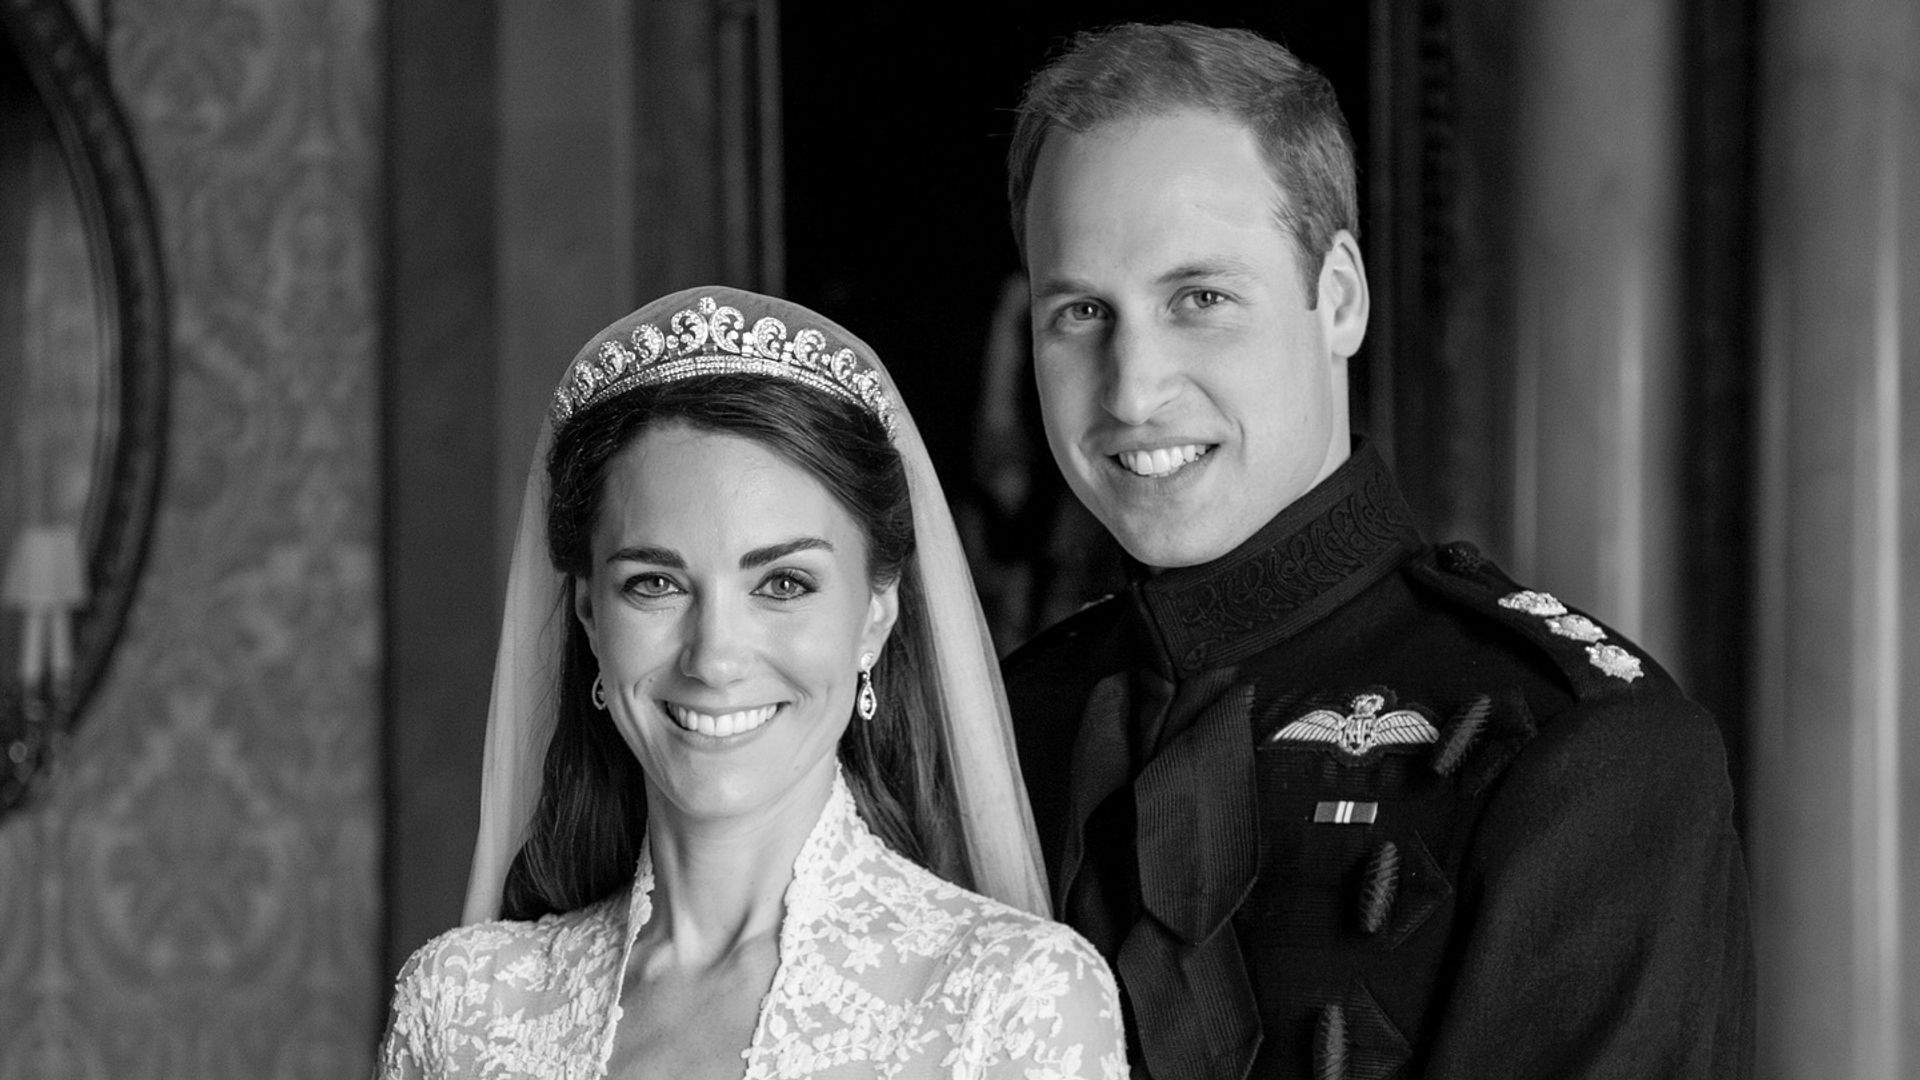 William and Kate shared a previously unseen portrait from their wedding day